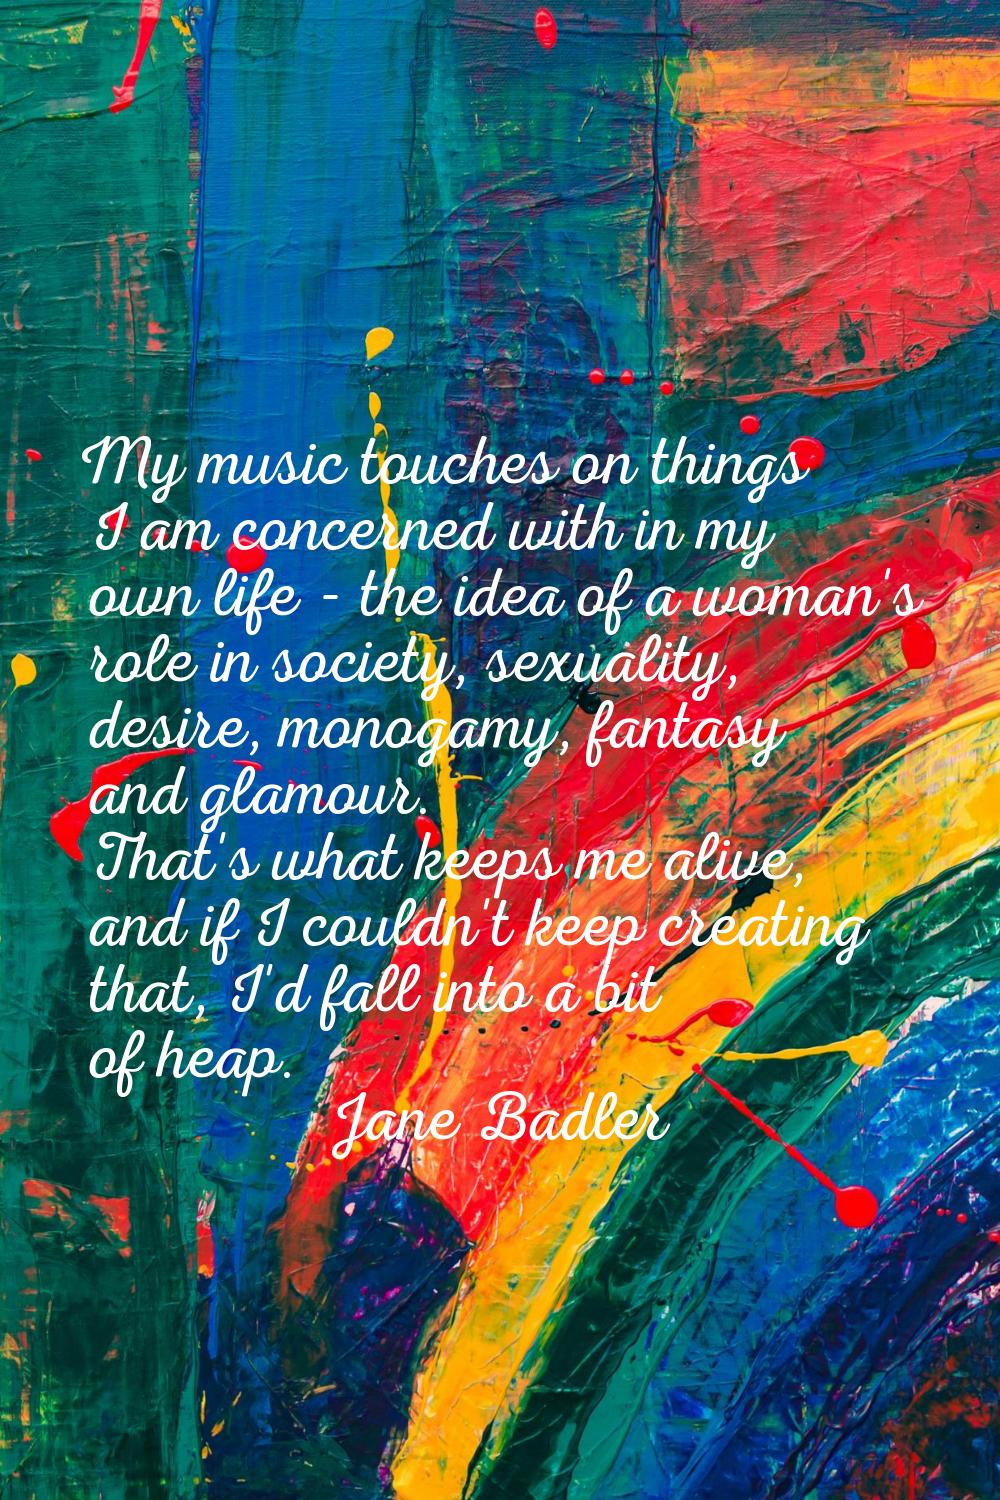 My music touches on things I am concerned with in my own life - the idea of a woman's role in socie